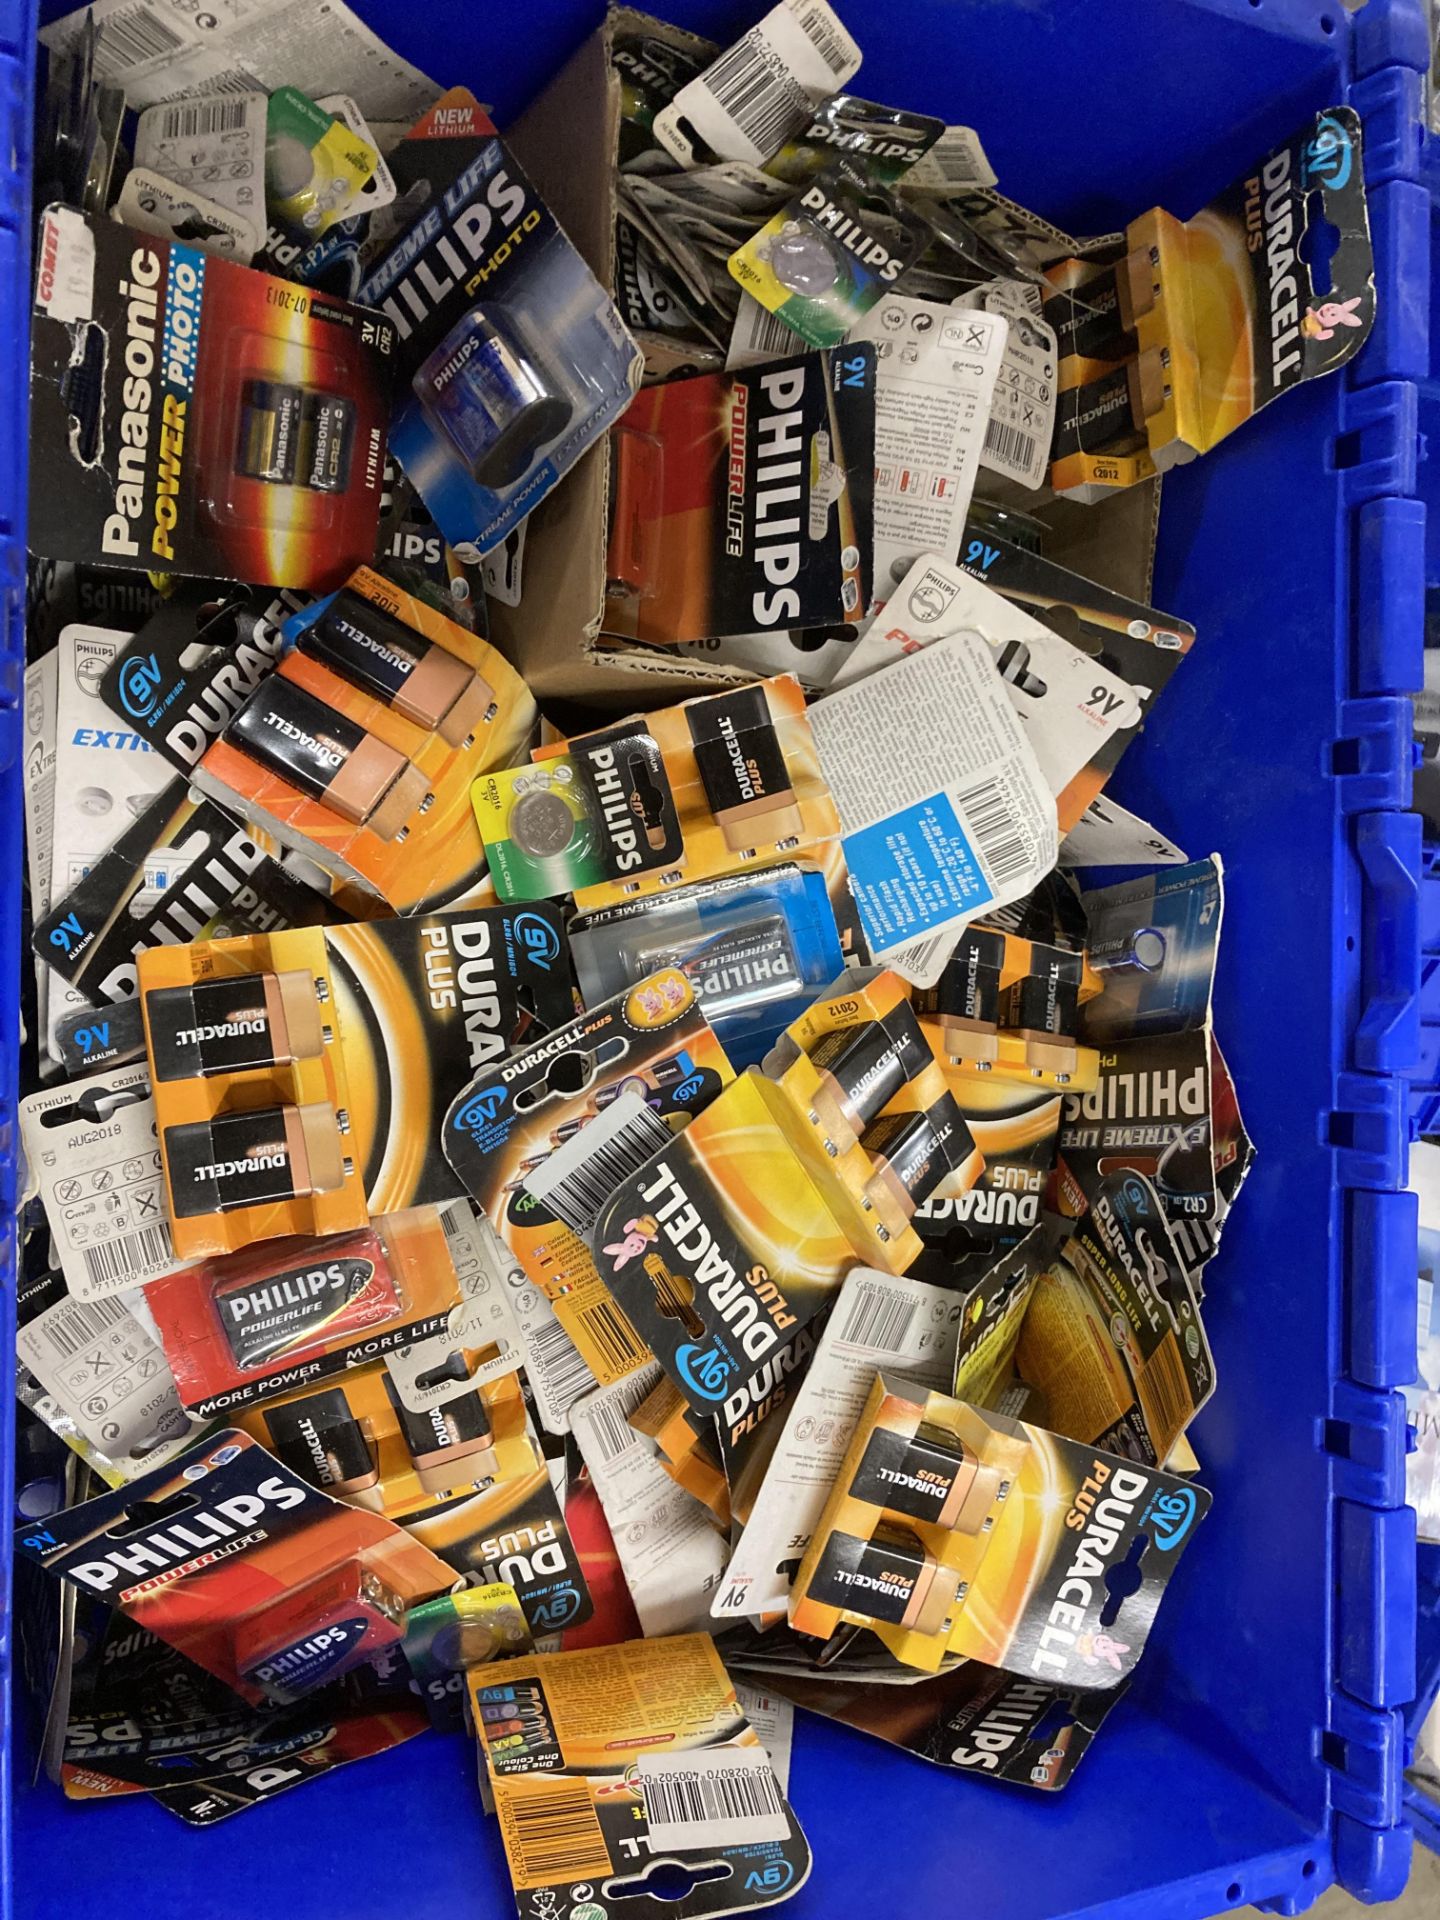 Contents to crate - assorted batteries by Duracell and Philips (please note: best before date